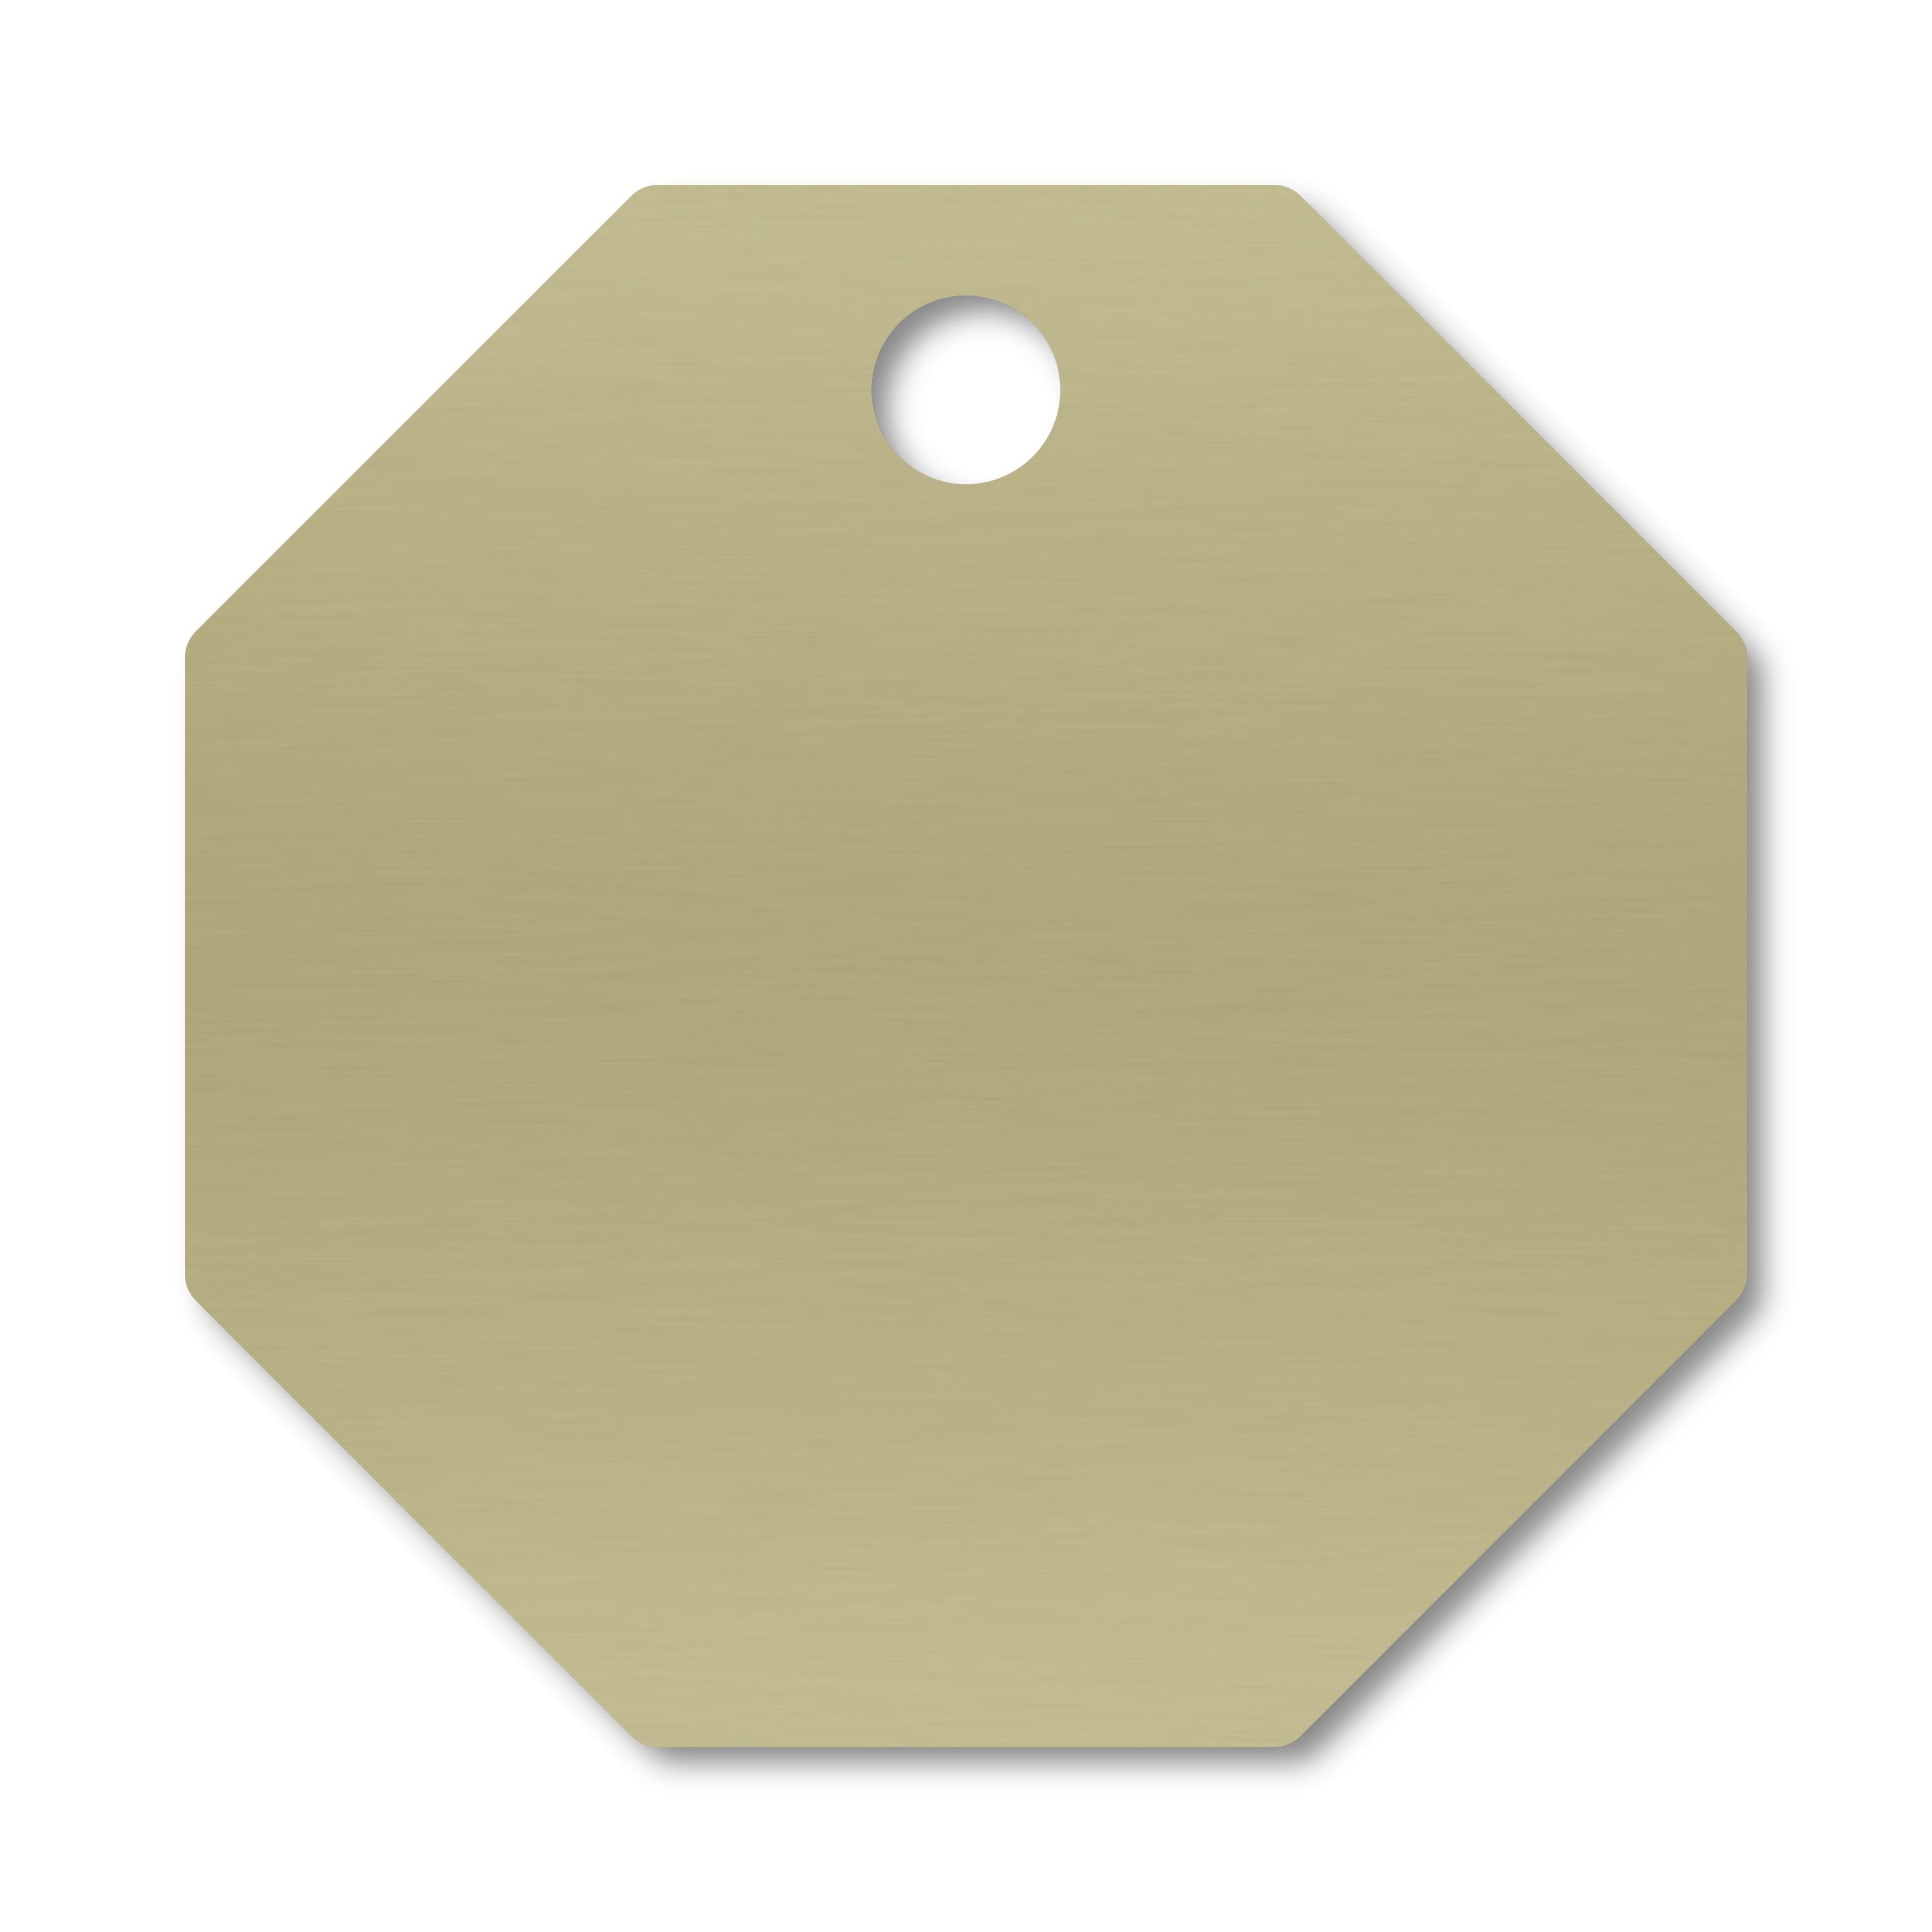 Anodized Aluminum Octagon Tags, 1" with 3/32" Hole, Laser Engraved Metal Tags Craftworks NW Gold 